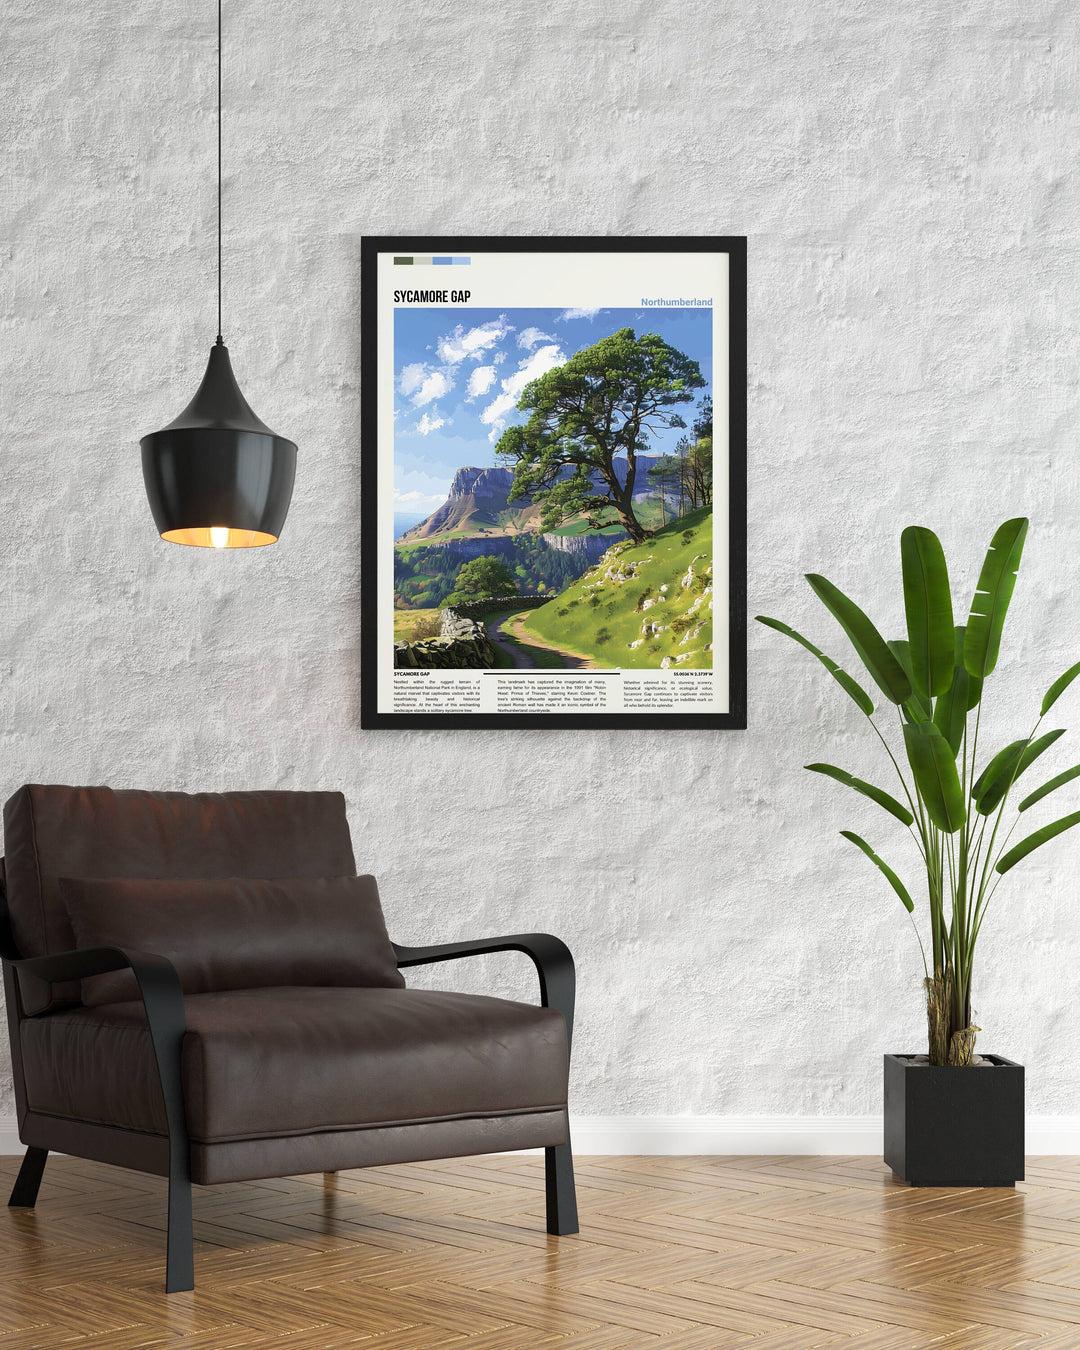 Northumberland Inspiration: Celebrate new beginnings with this Sycamore Gap art, a stunning housewarming gift capturing the essence of the English countryside